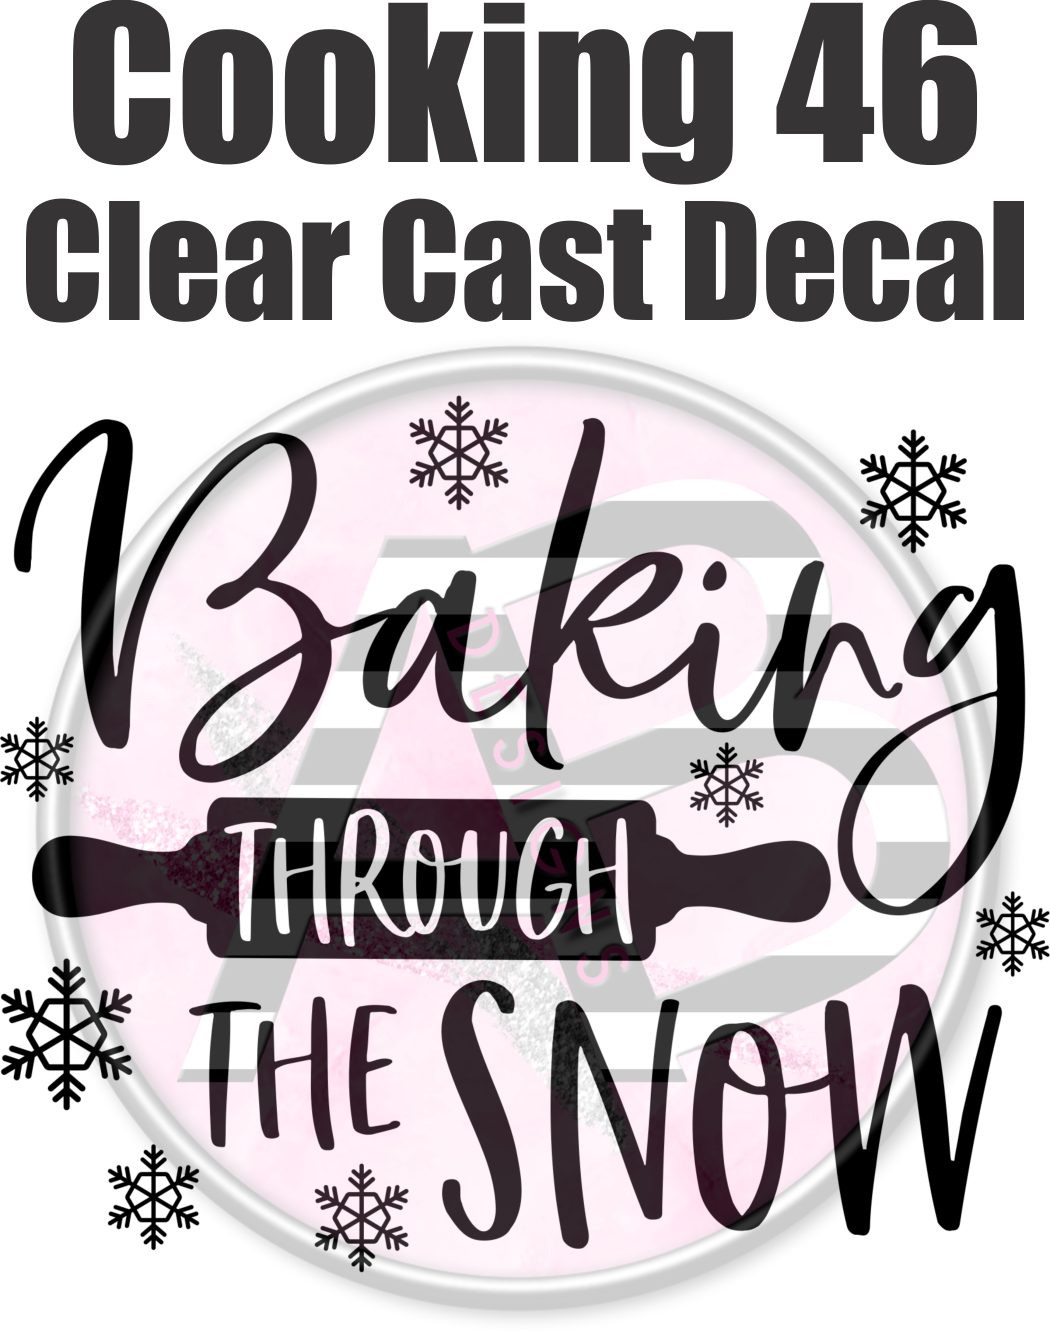 Cooking 46 - Clear Cast Decal - 194